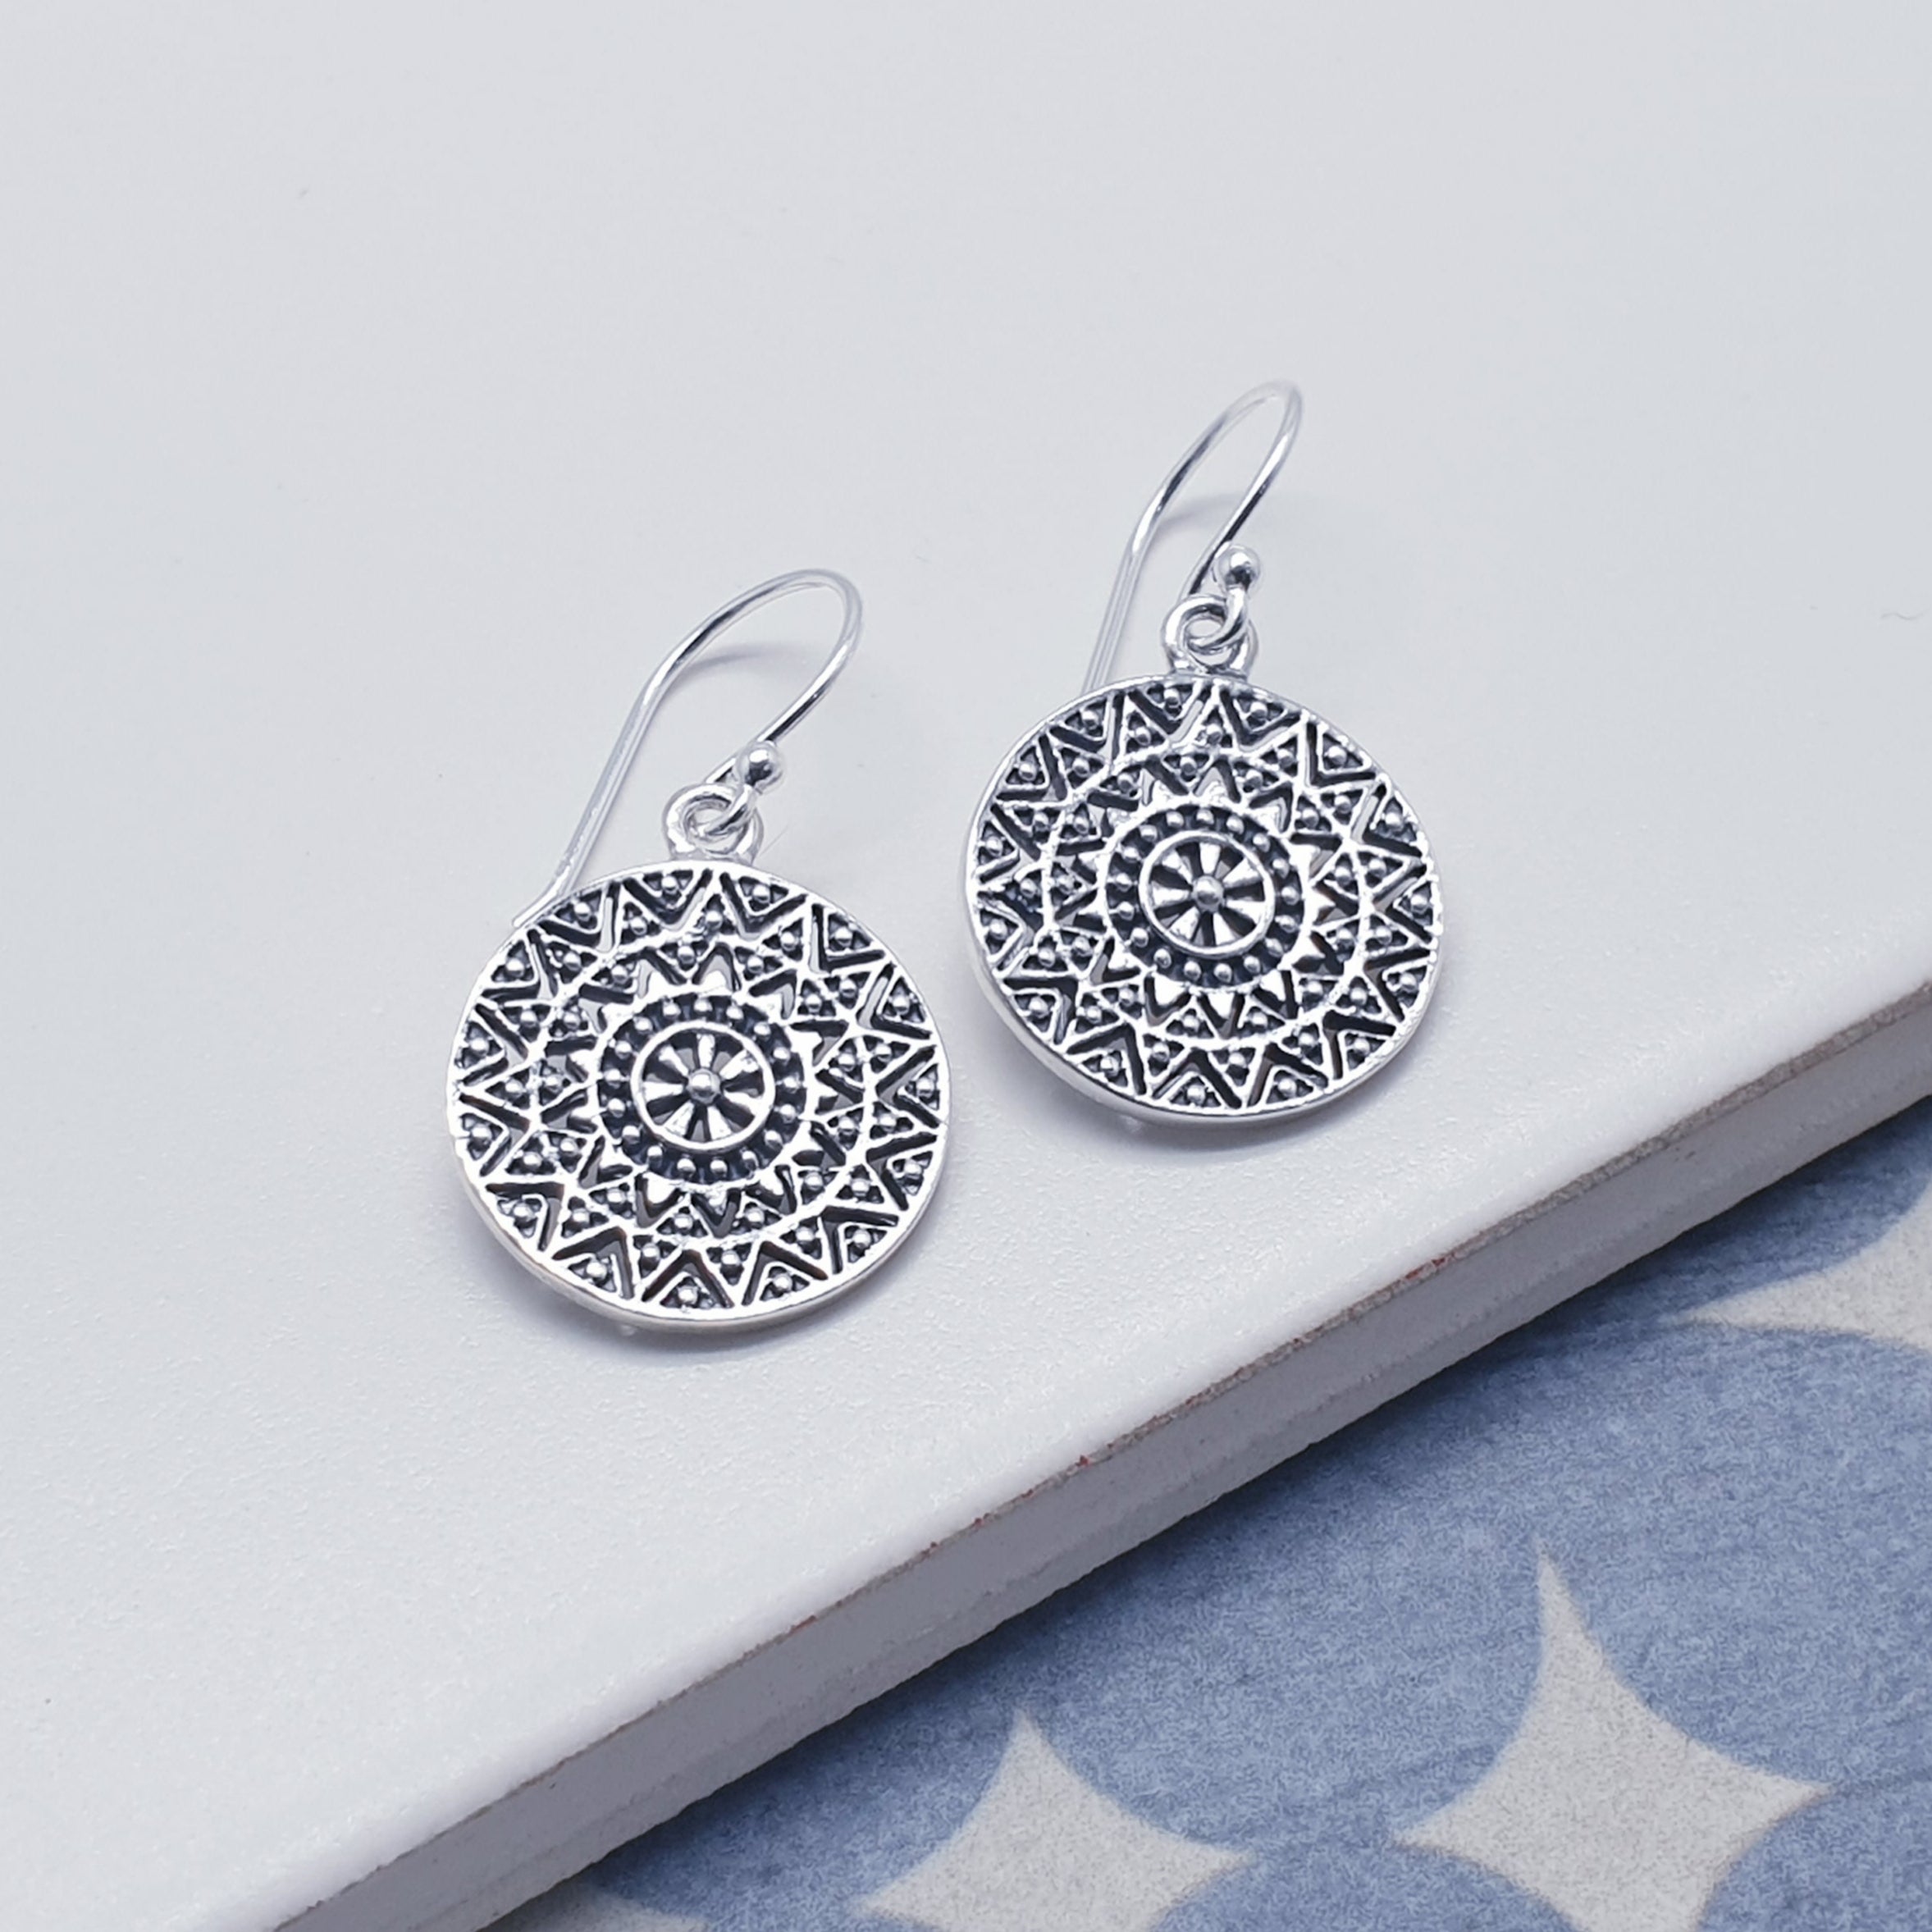 STERLING SILVER EARRINGS Australia. Up to 40% Off Site Wide